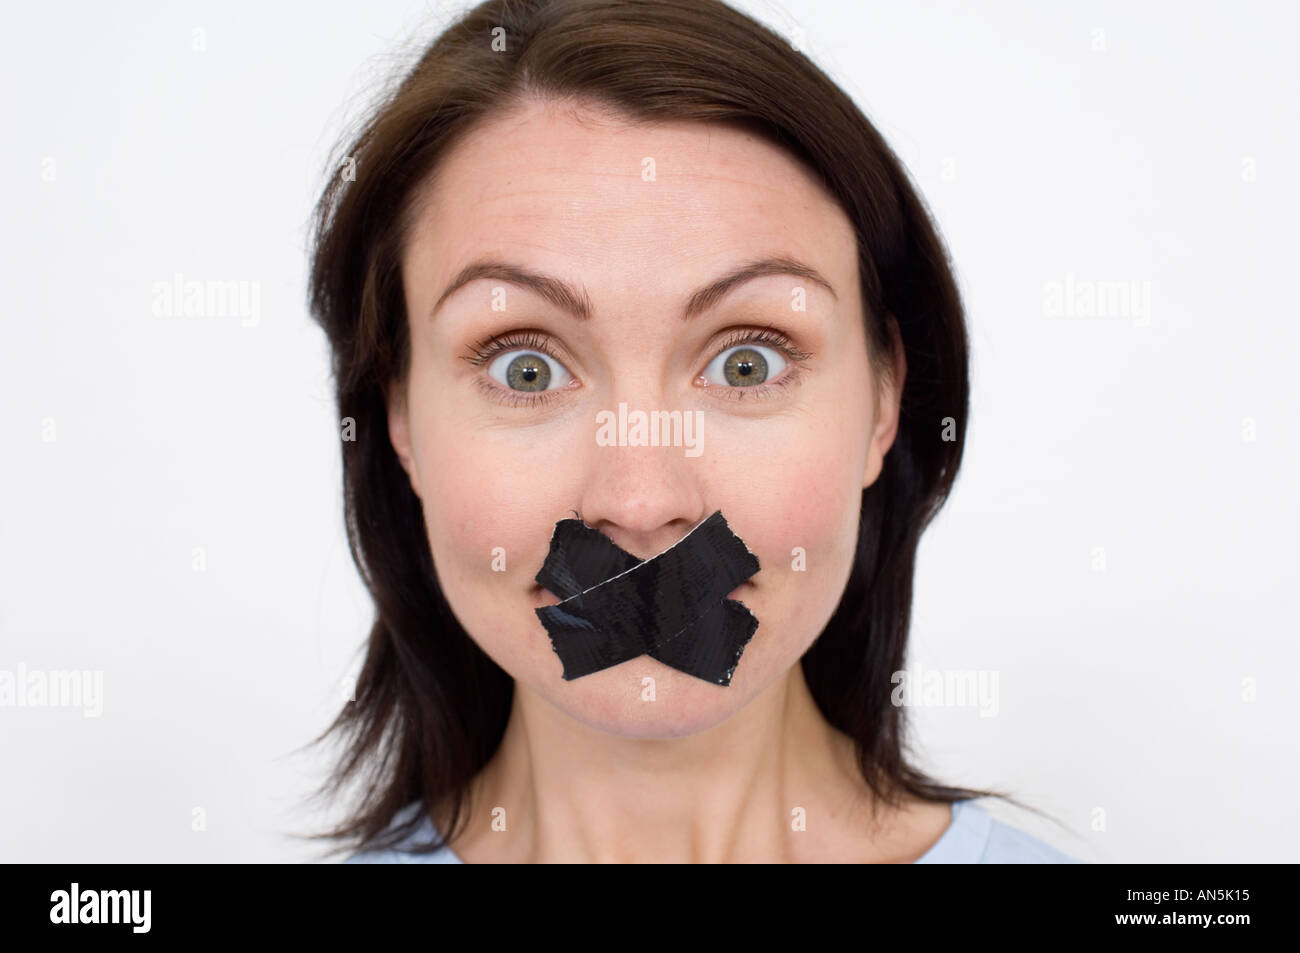 woman with her mouth taped up Stock Photo